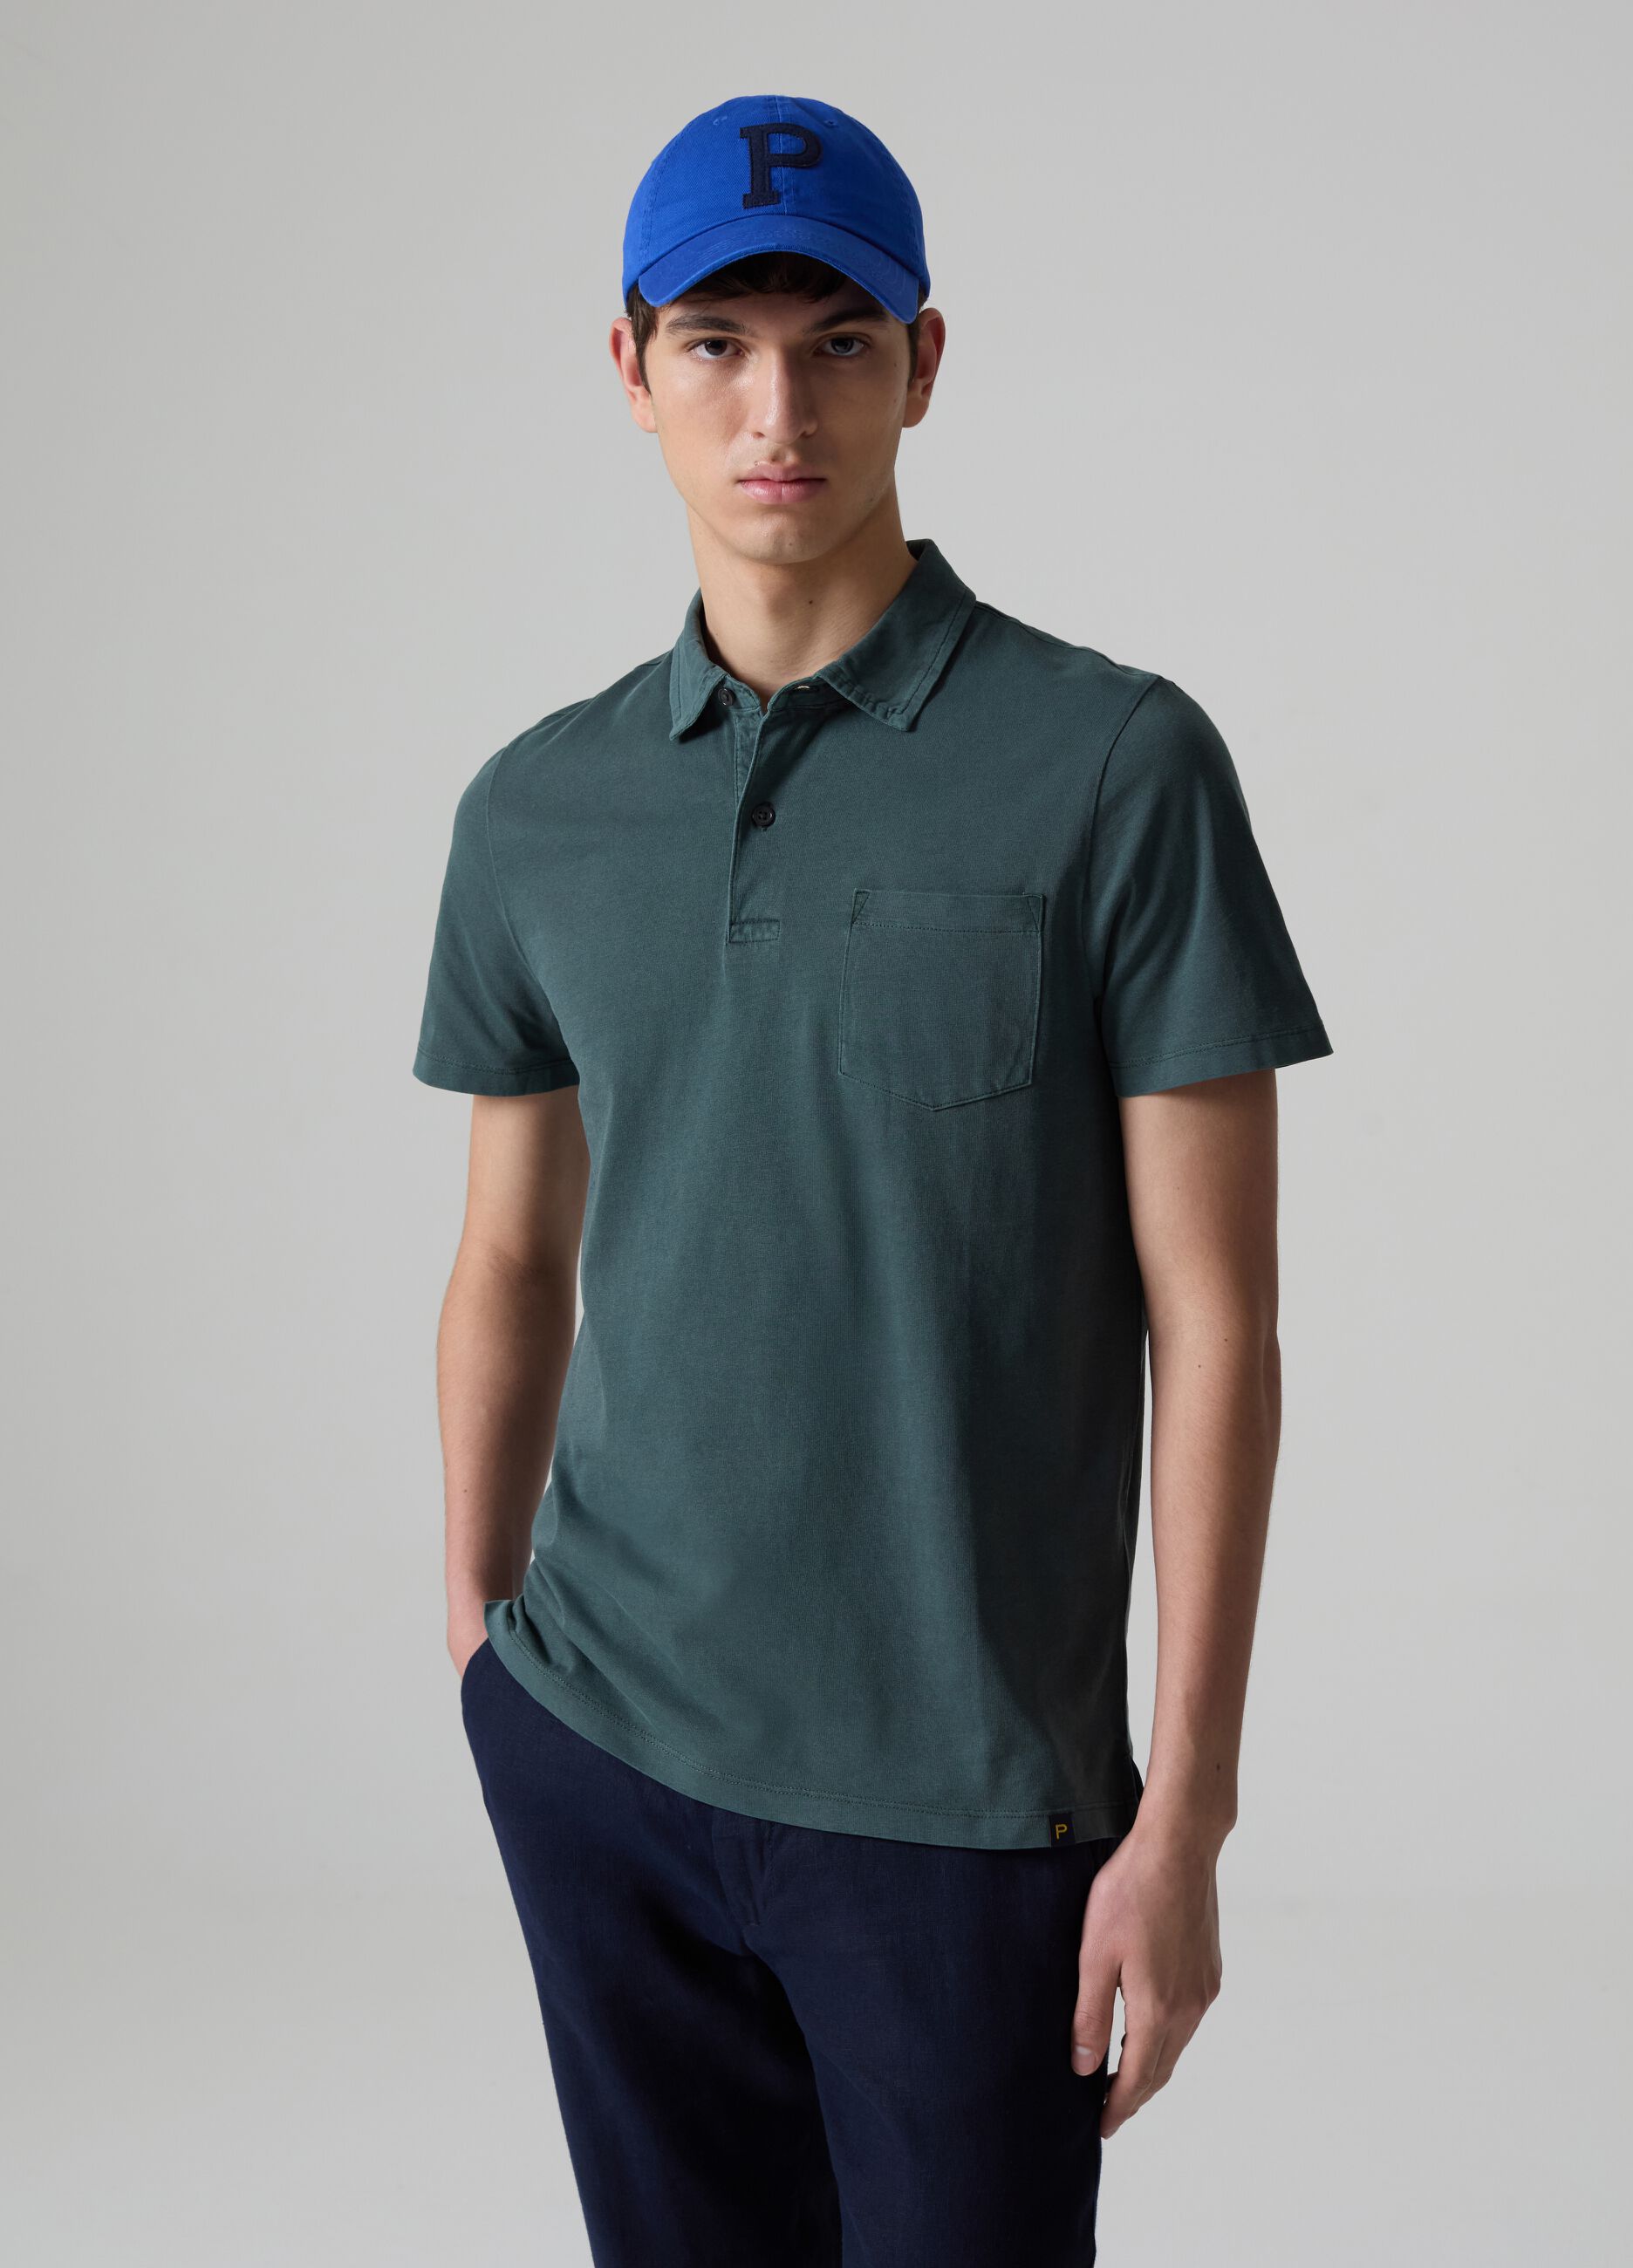 Jersey polo shirt with pocket